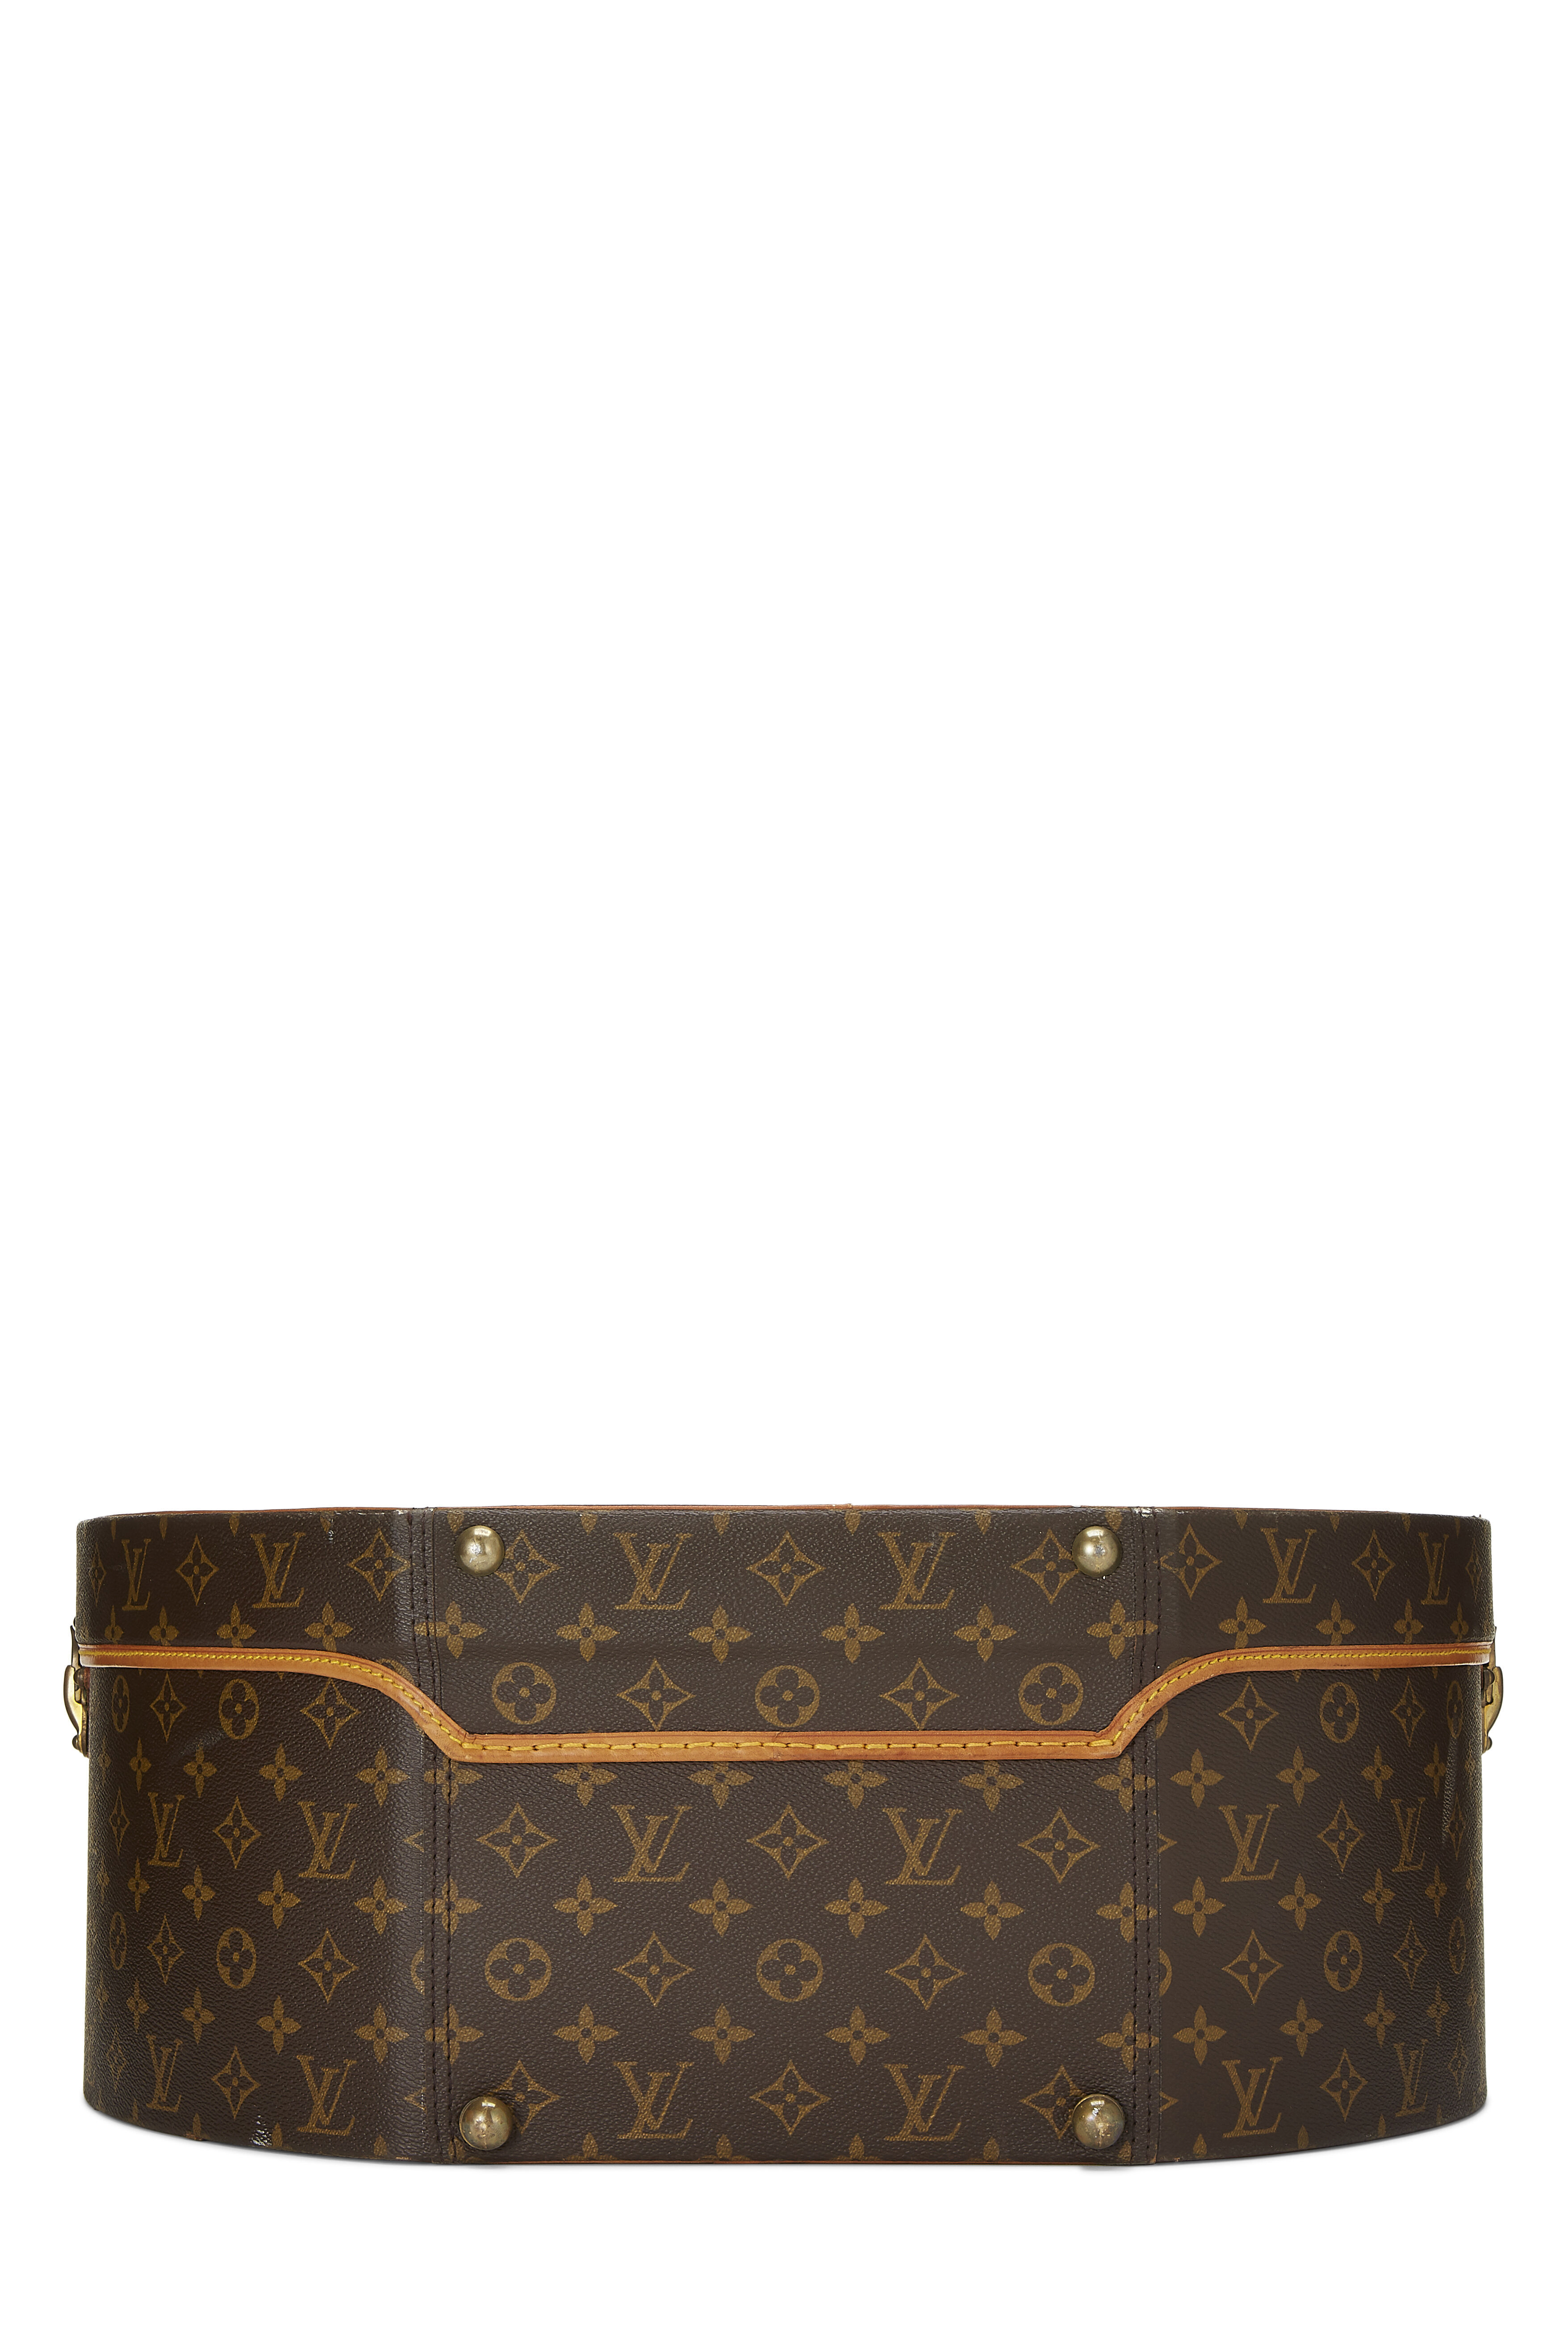 Louis Vuitton's Mini Monogram Bag Is Small In Size But Big On Style -  ZULA.sg